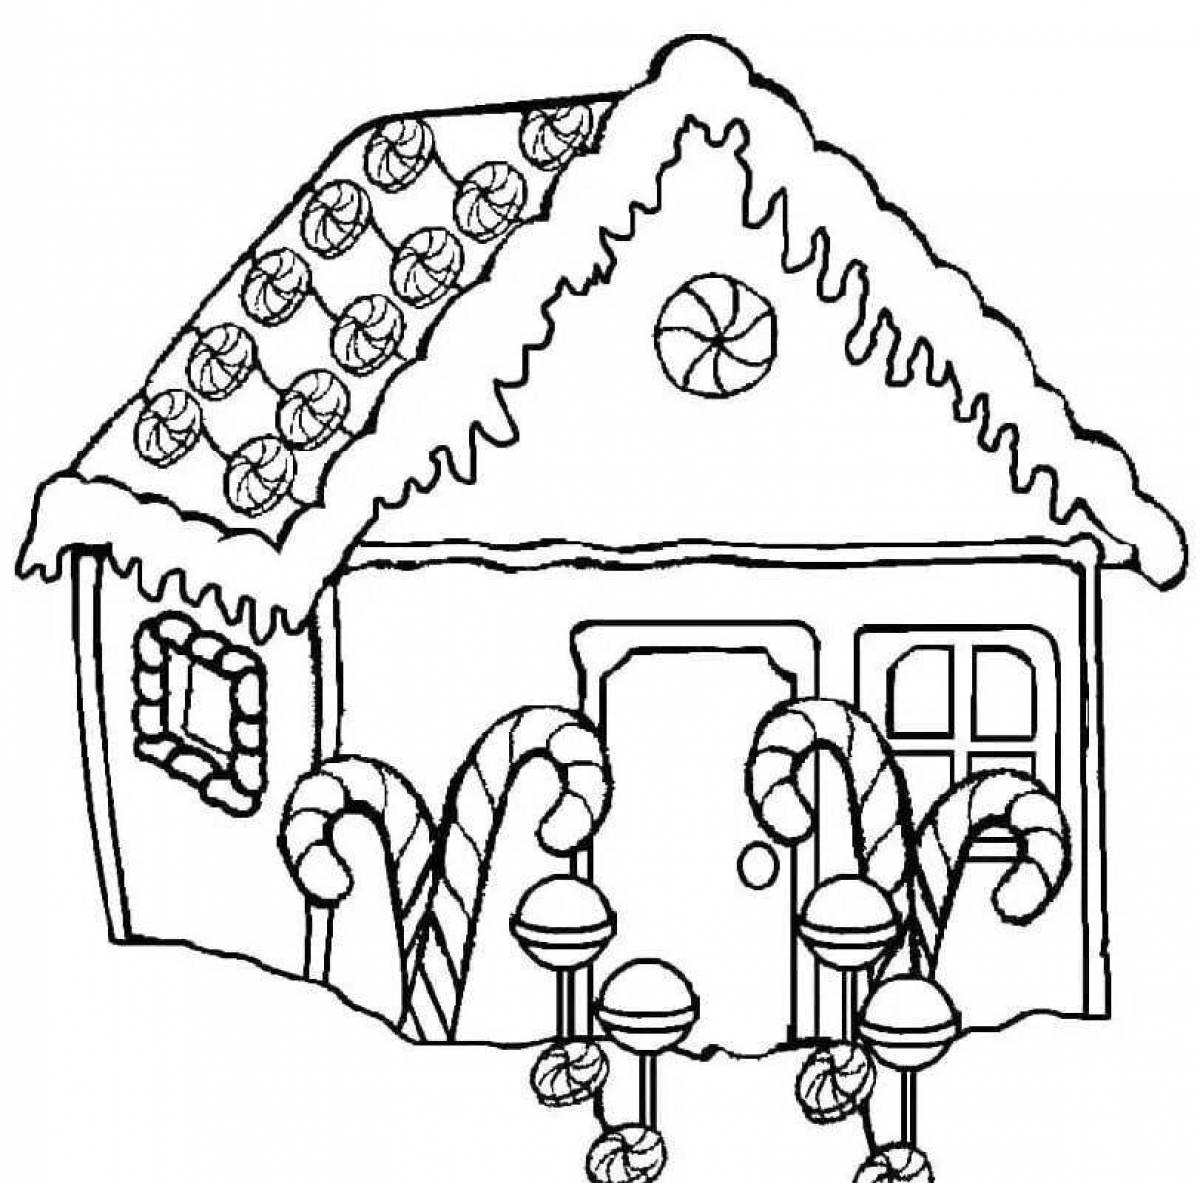 Exciting Christmas house coloring book